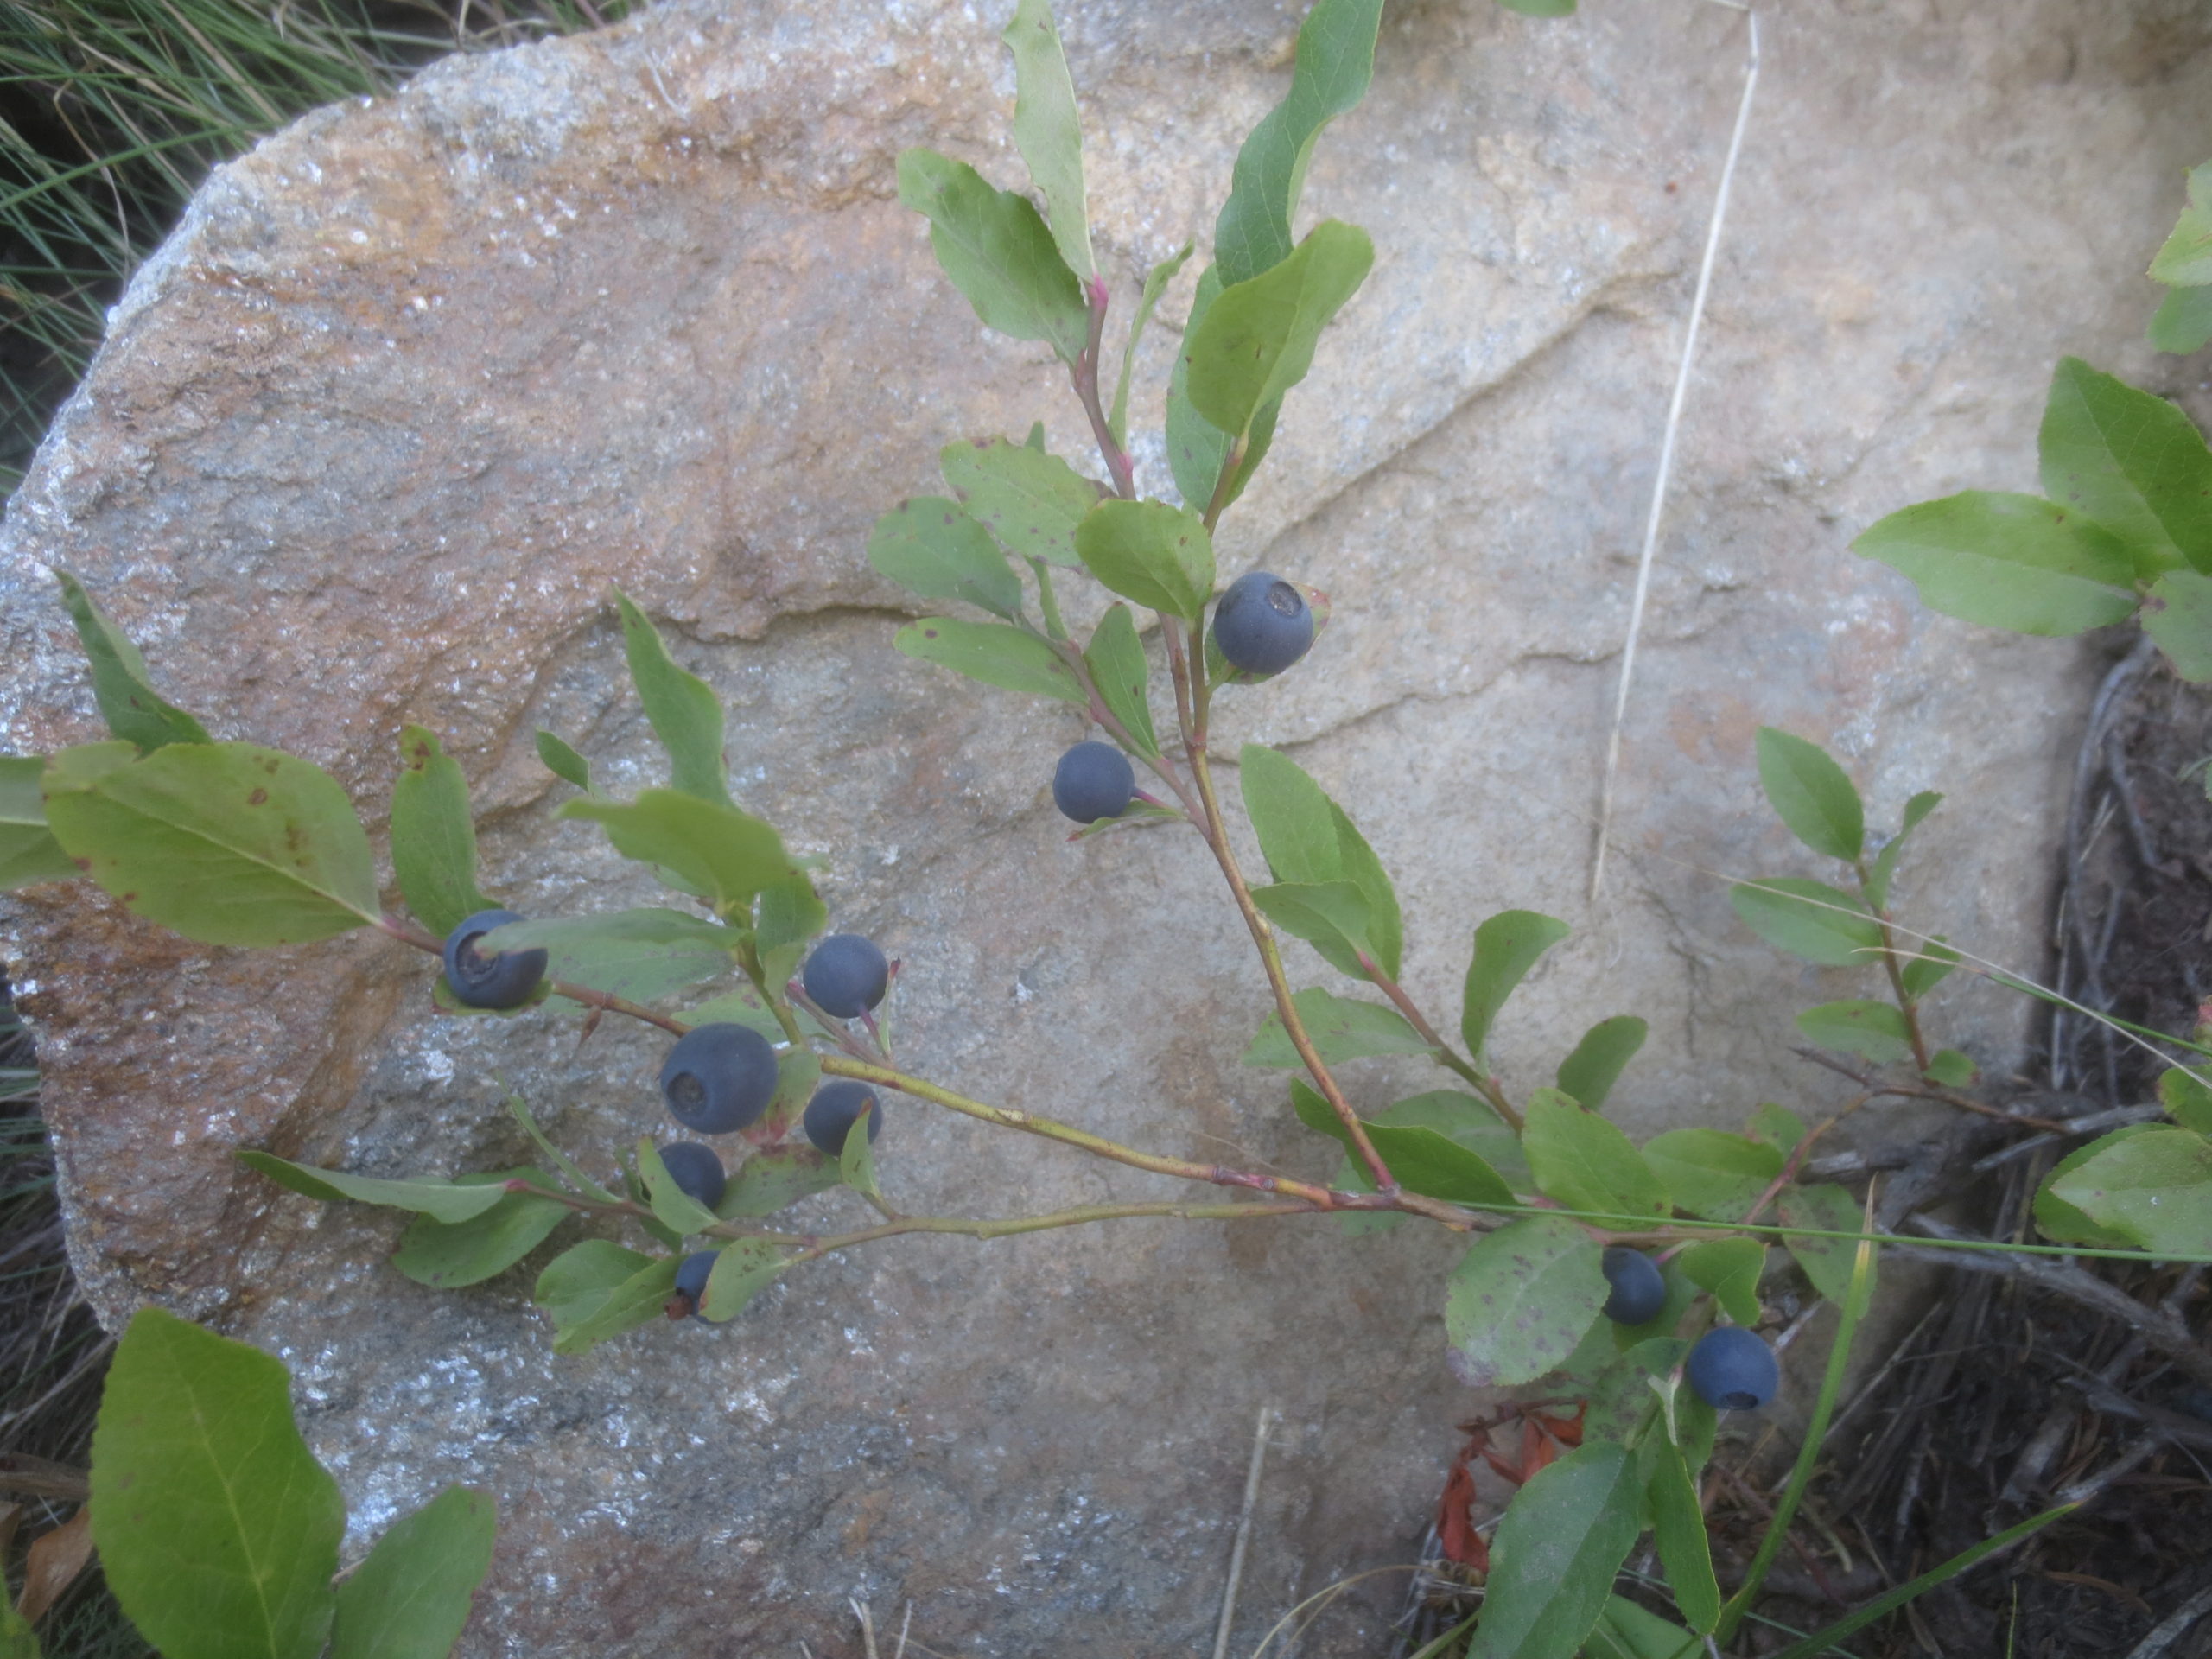 huckleberries on a branch with rock in background